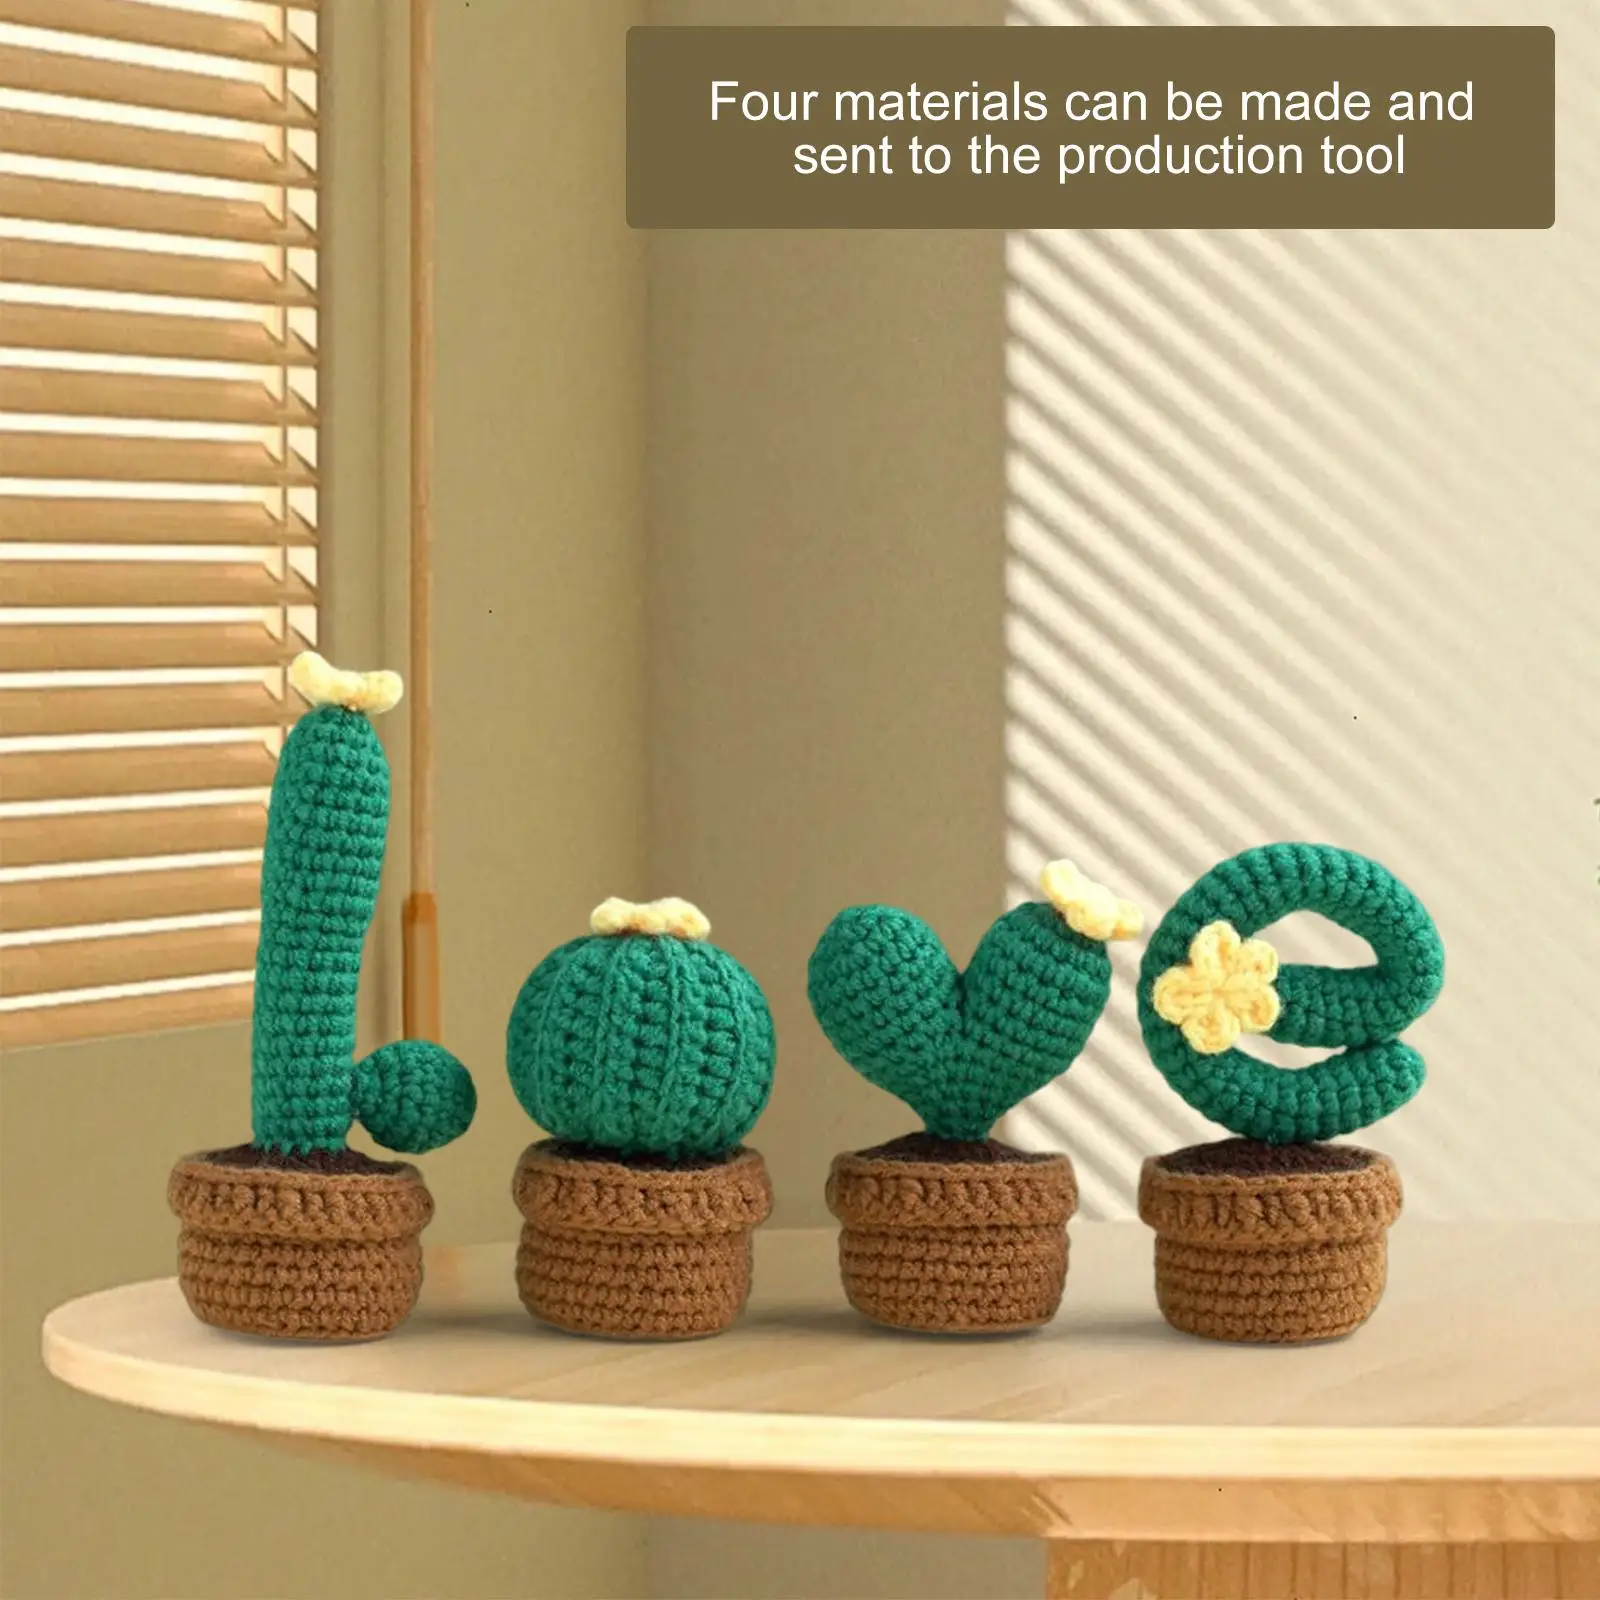 Complete Crochet Kit Basic Tool Hand Knitting Toy All in Learn to Crochet Accessories DIY Crocheted Planter for Kids Teens